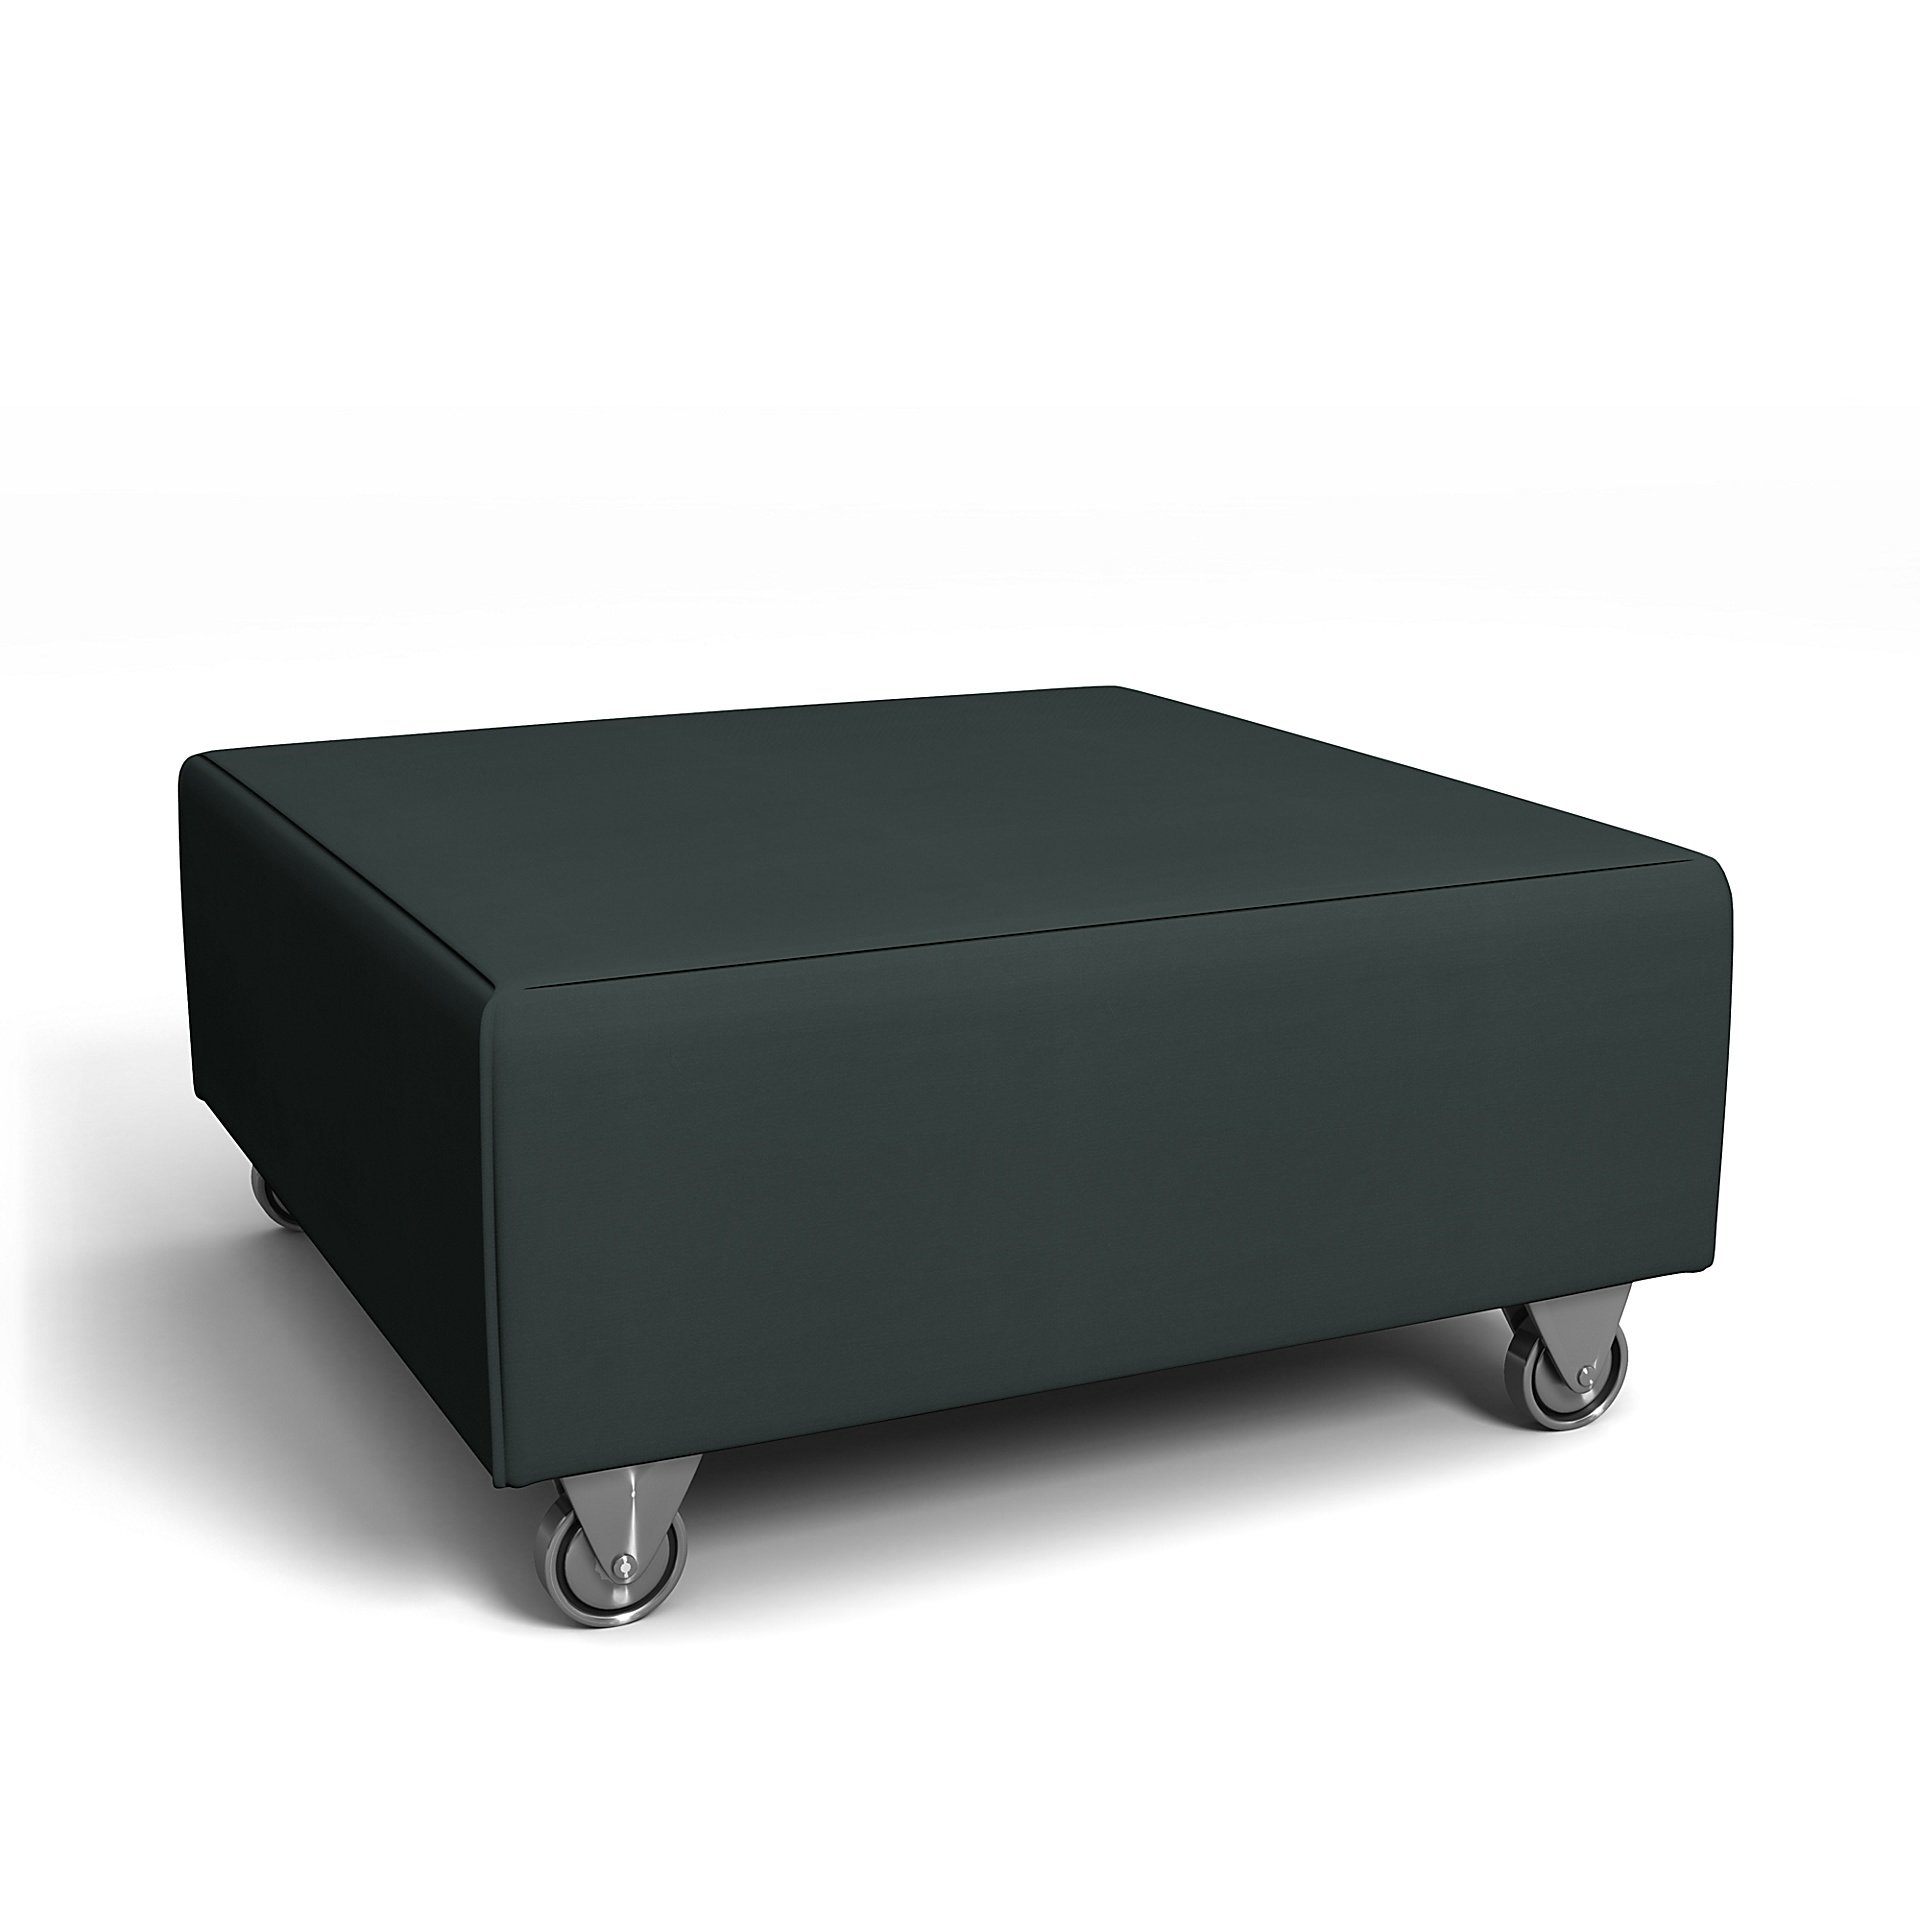 IKEA - Falsterbo Footstool Cover, Graphite Grey, Cotton - Bemz